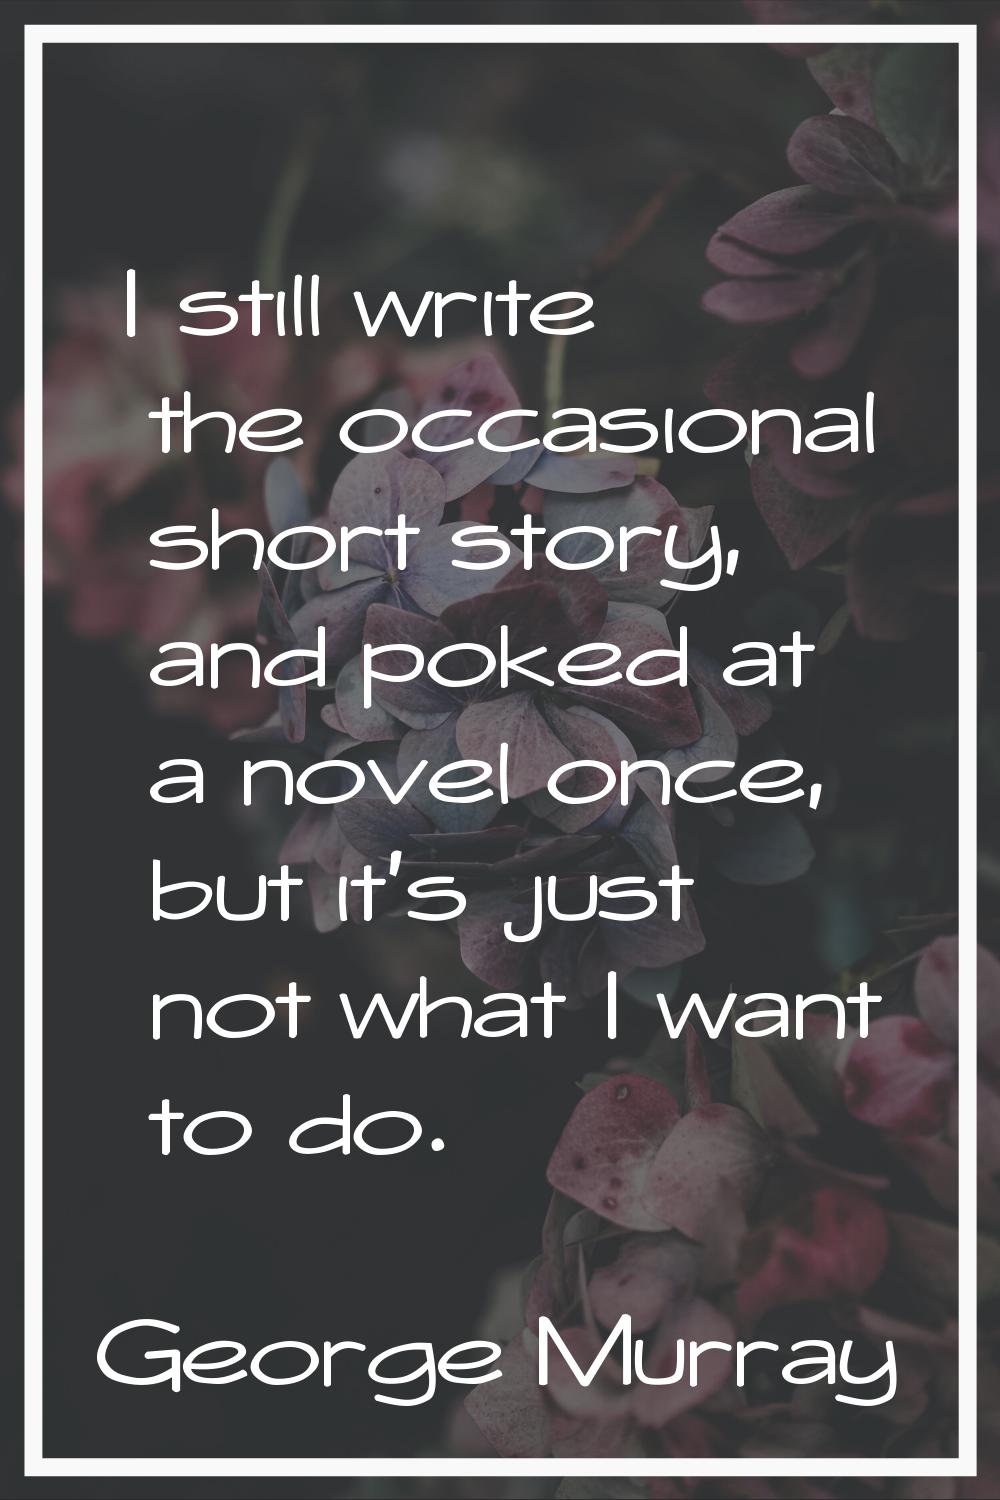 I still write the occasional short story, and poked at a novel once, but it's just not what I want 